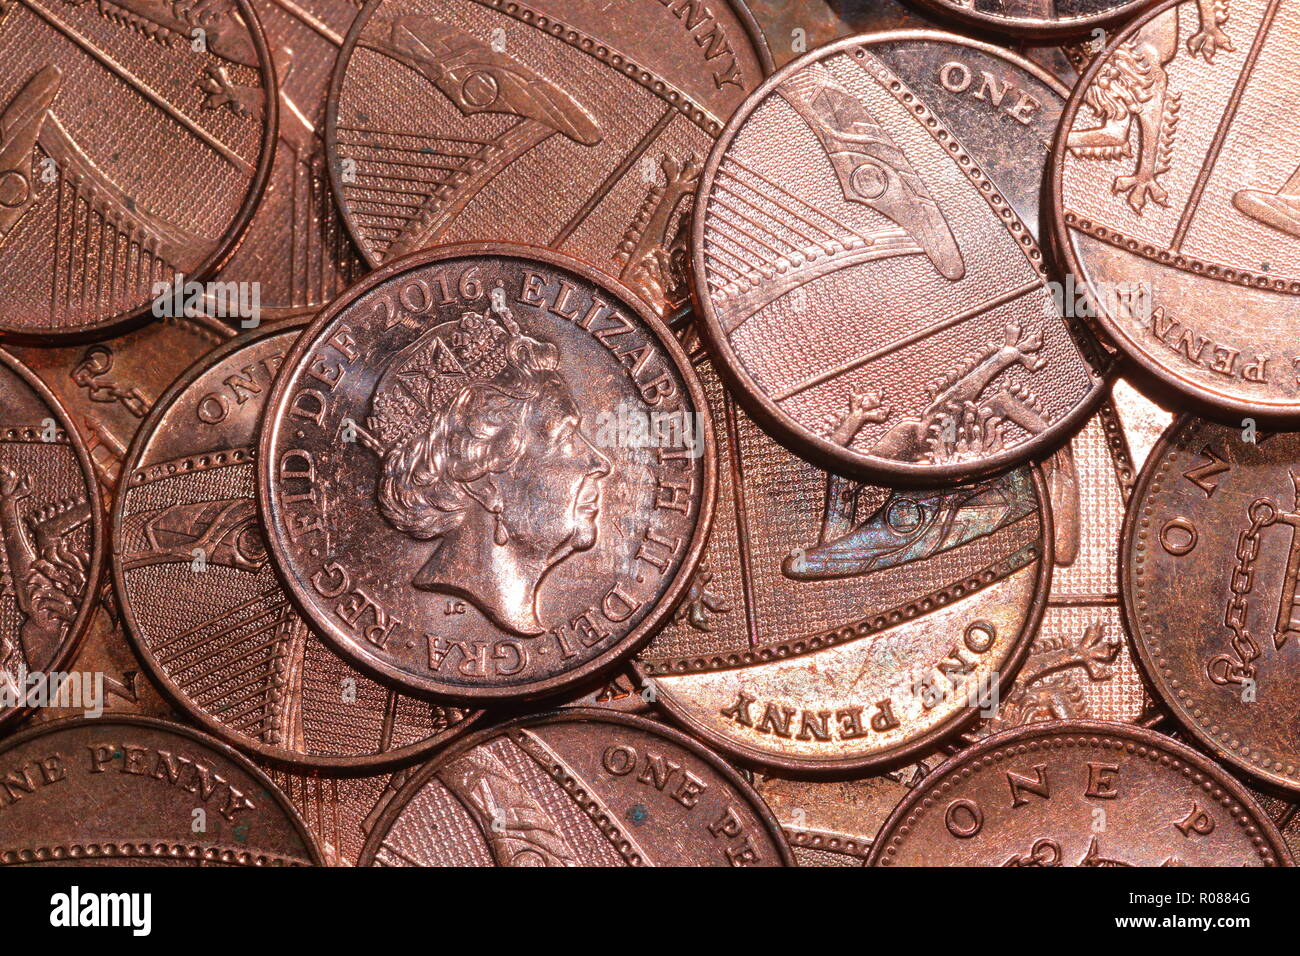 A heap of one pence coins Stock Photo